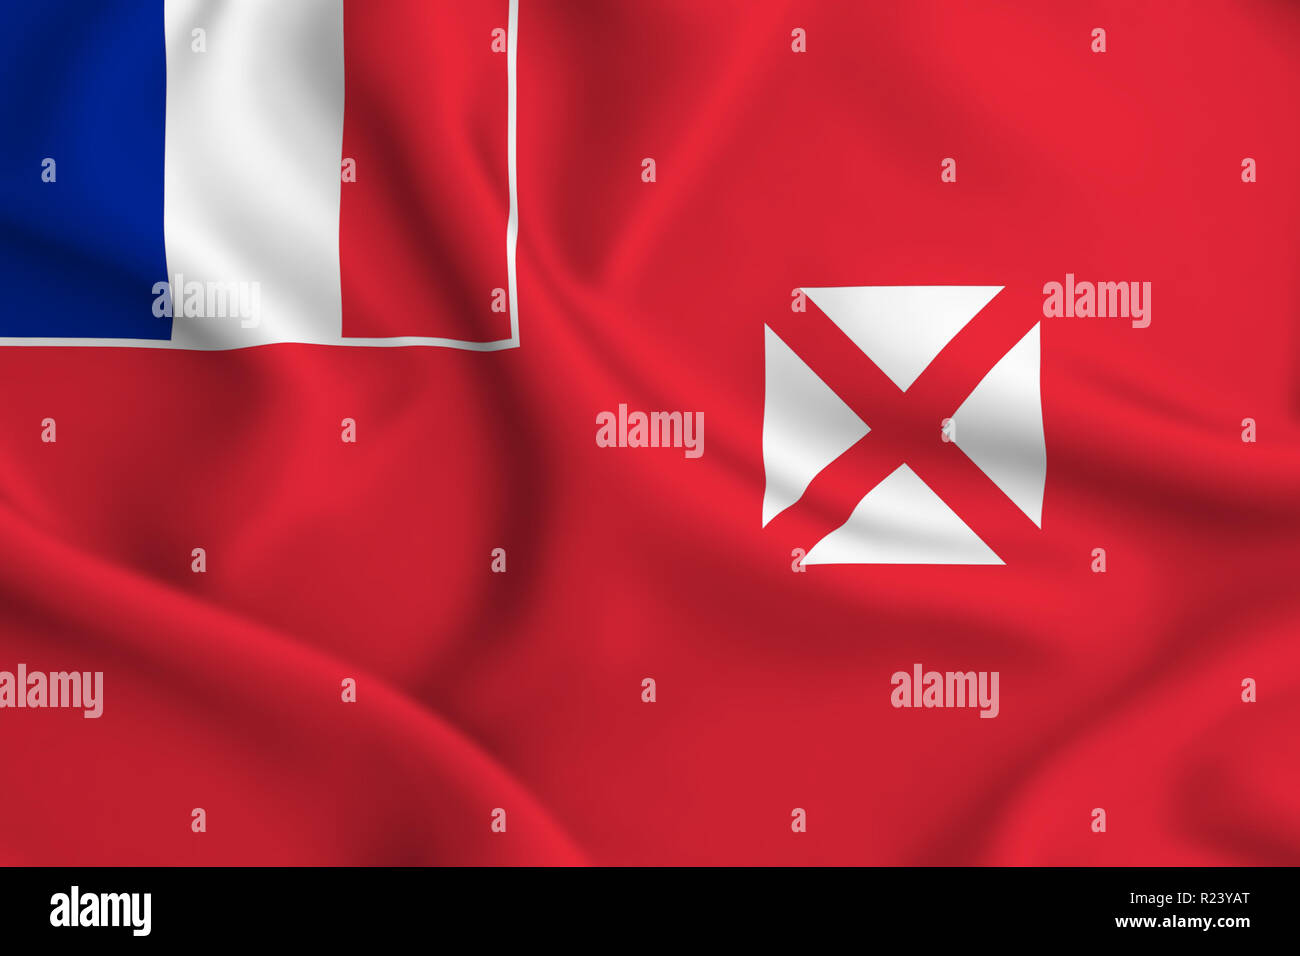 Wallis And Futuna 3D waving flag illustration. Texture can be used as background. Stock Photo